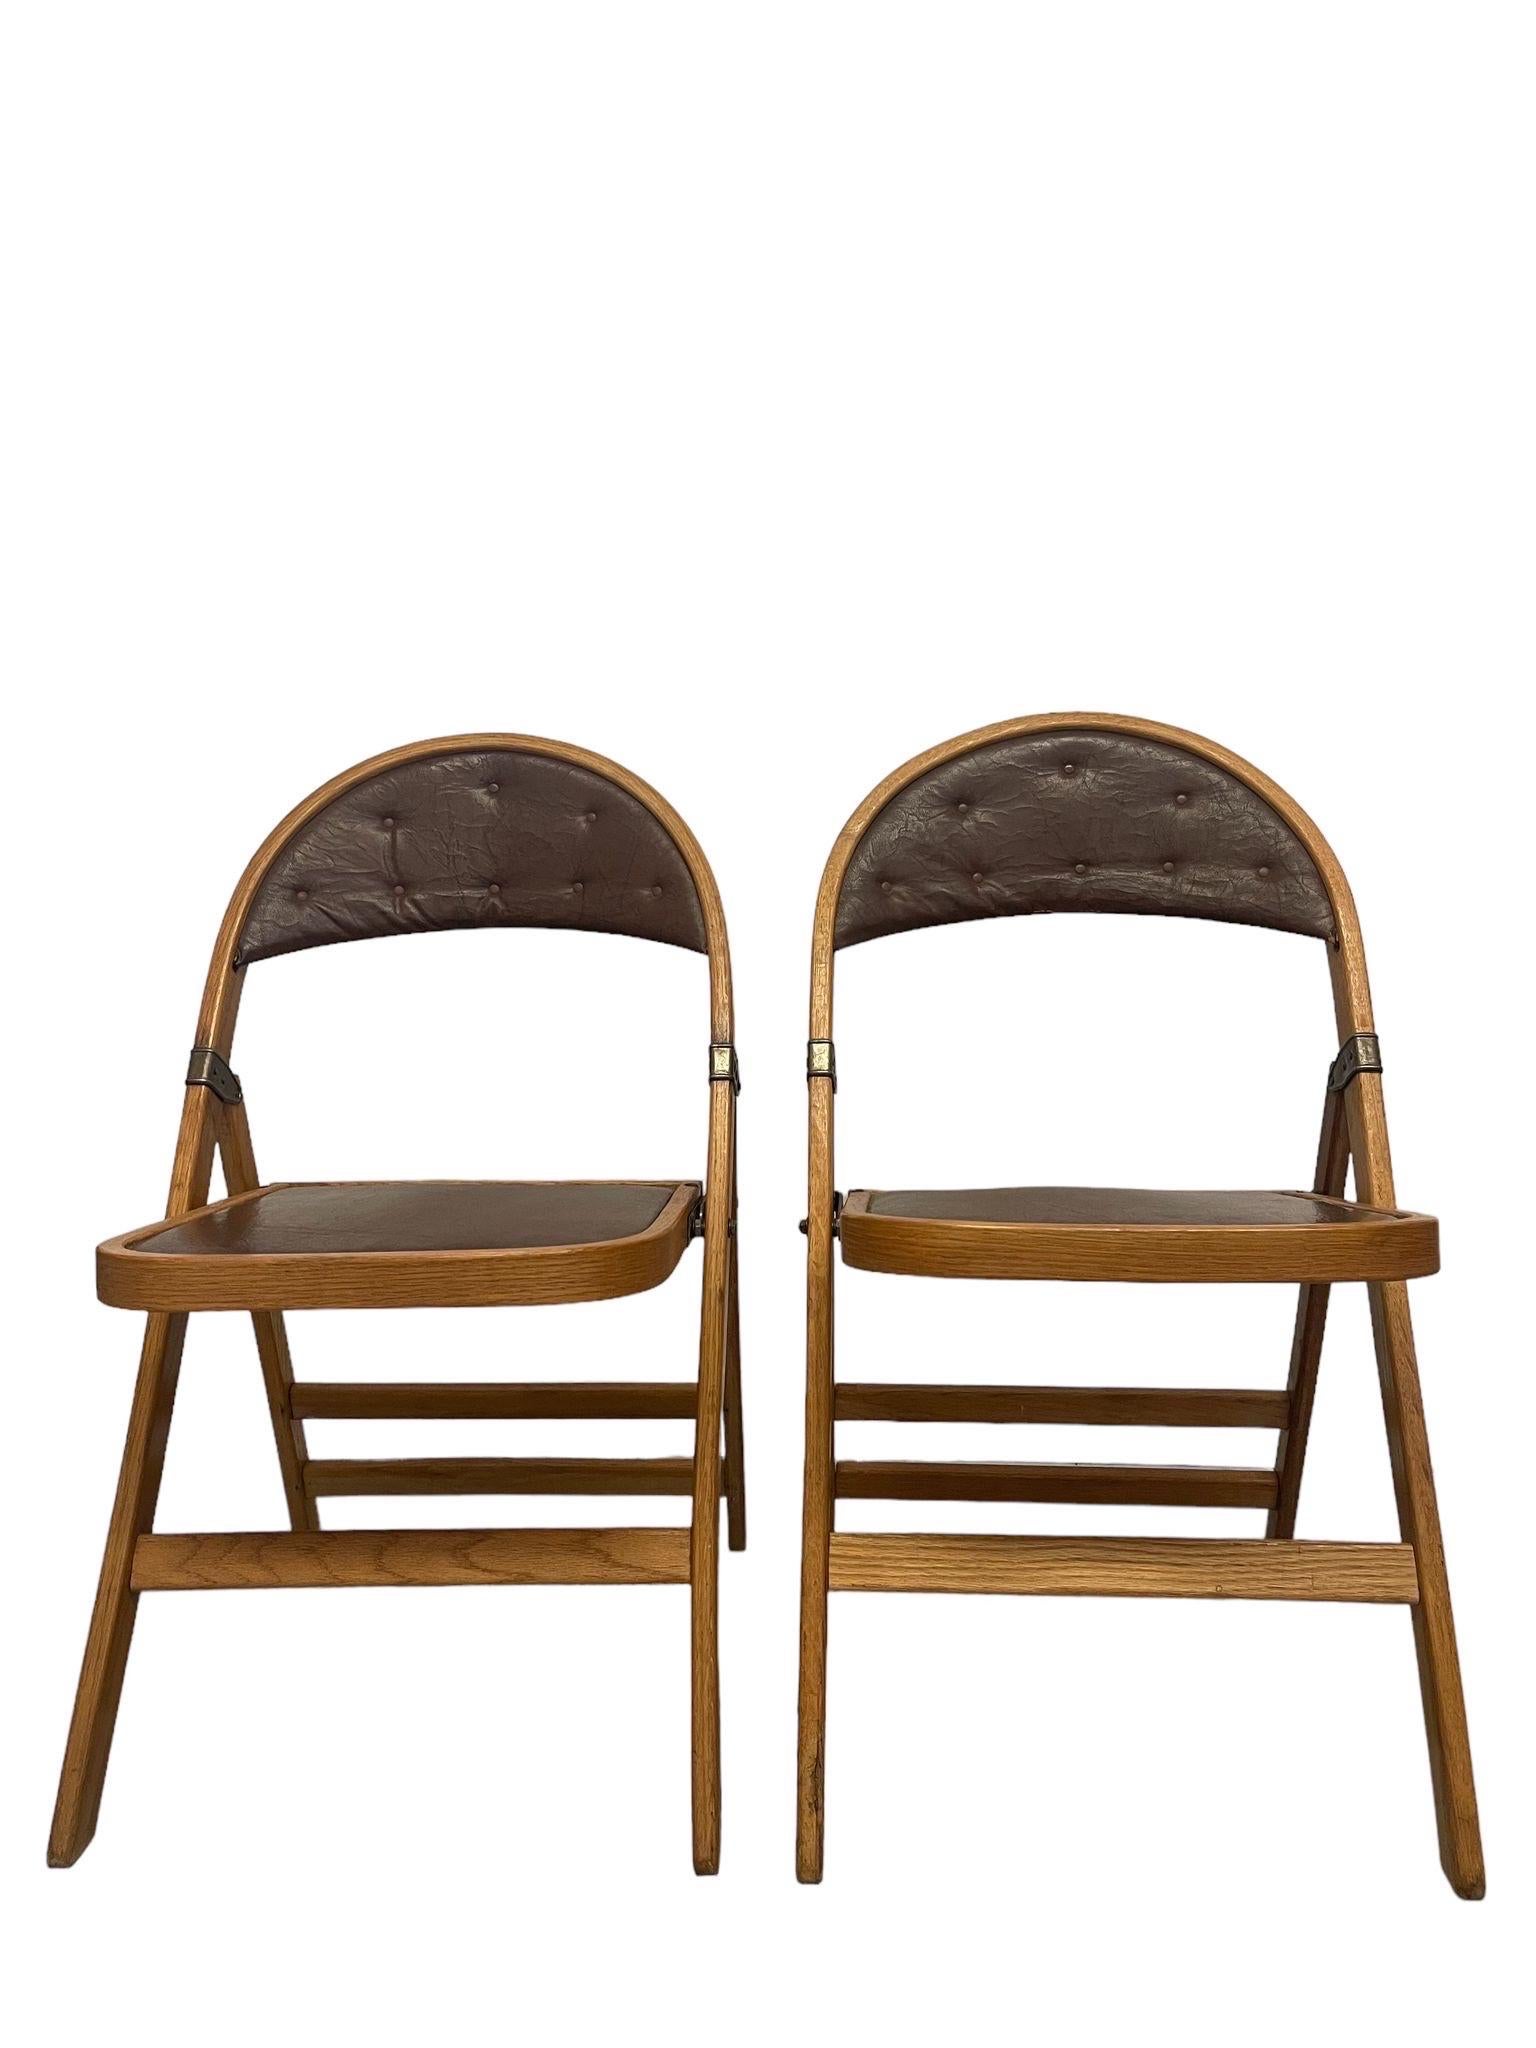 These Chairs will be Sold Separately .Possibly Leather Backing and Seat or Similar Material. Vintage Condition Consistent with Age as Pictured.

Dimensions. 21 W ; 18 D ; 32 H